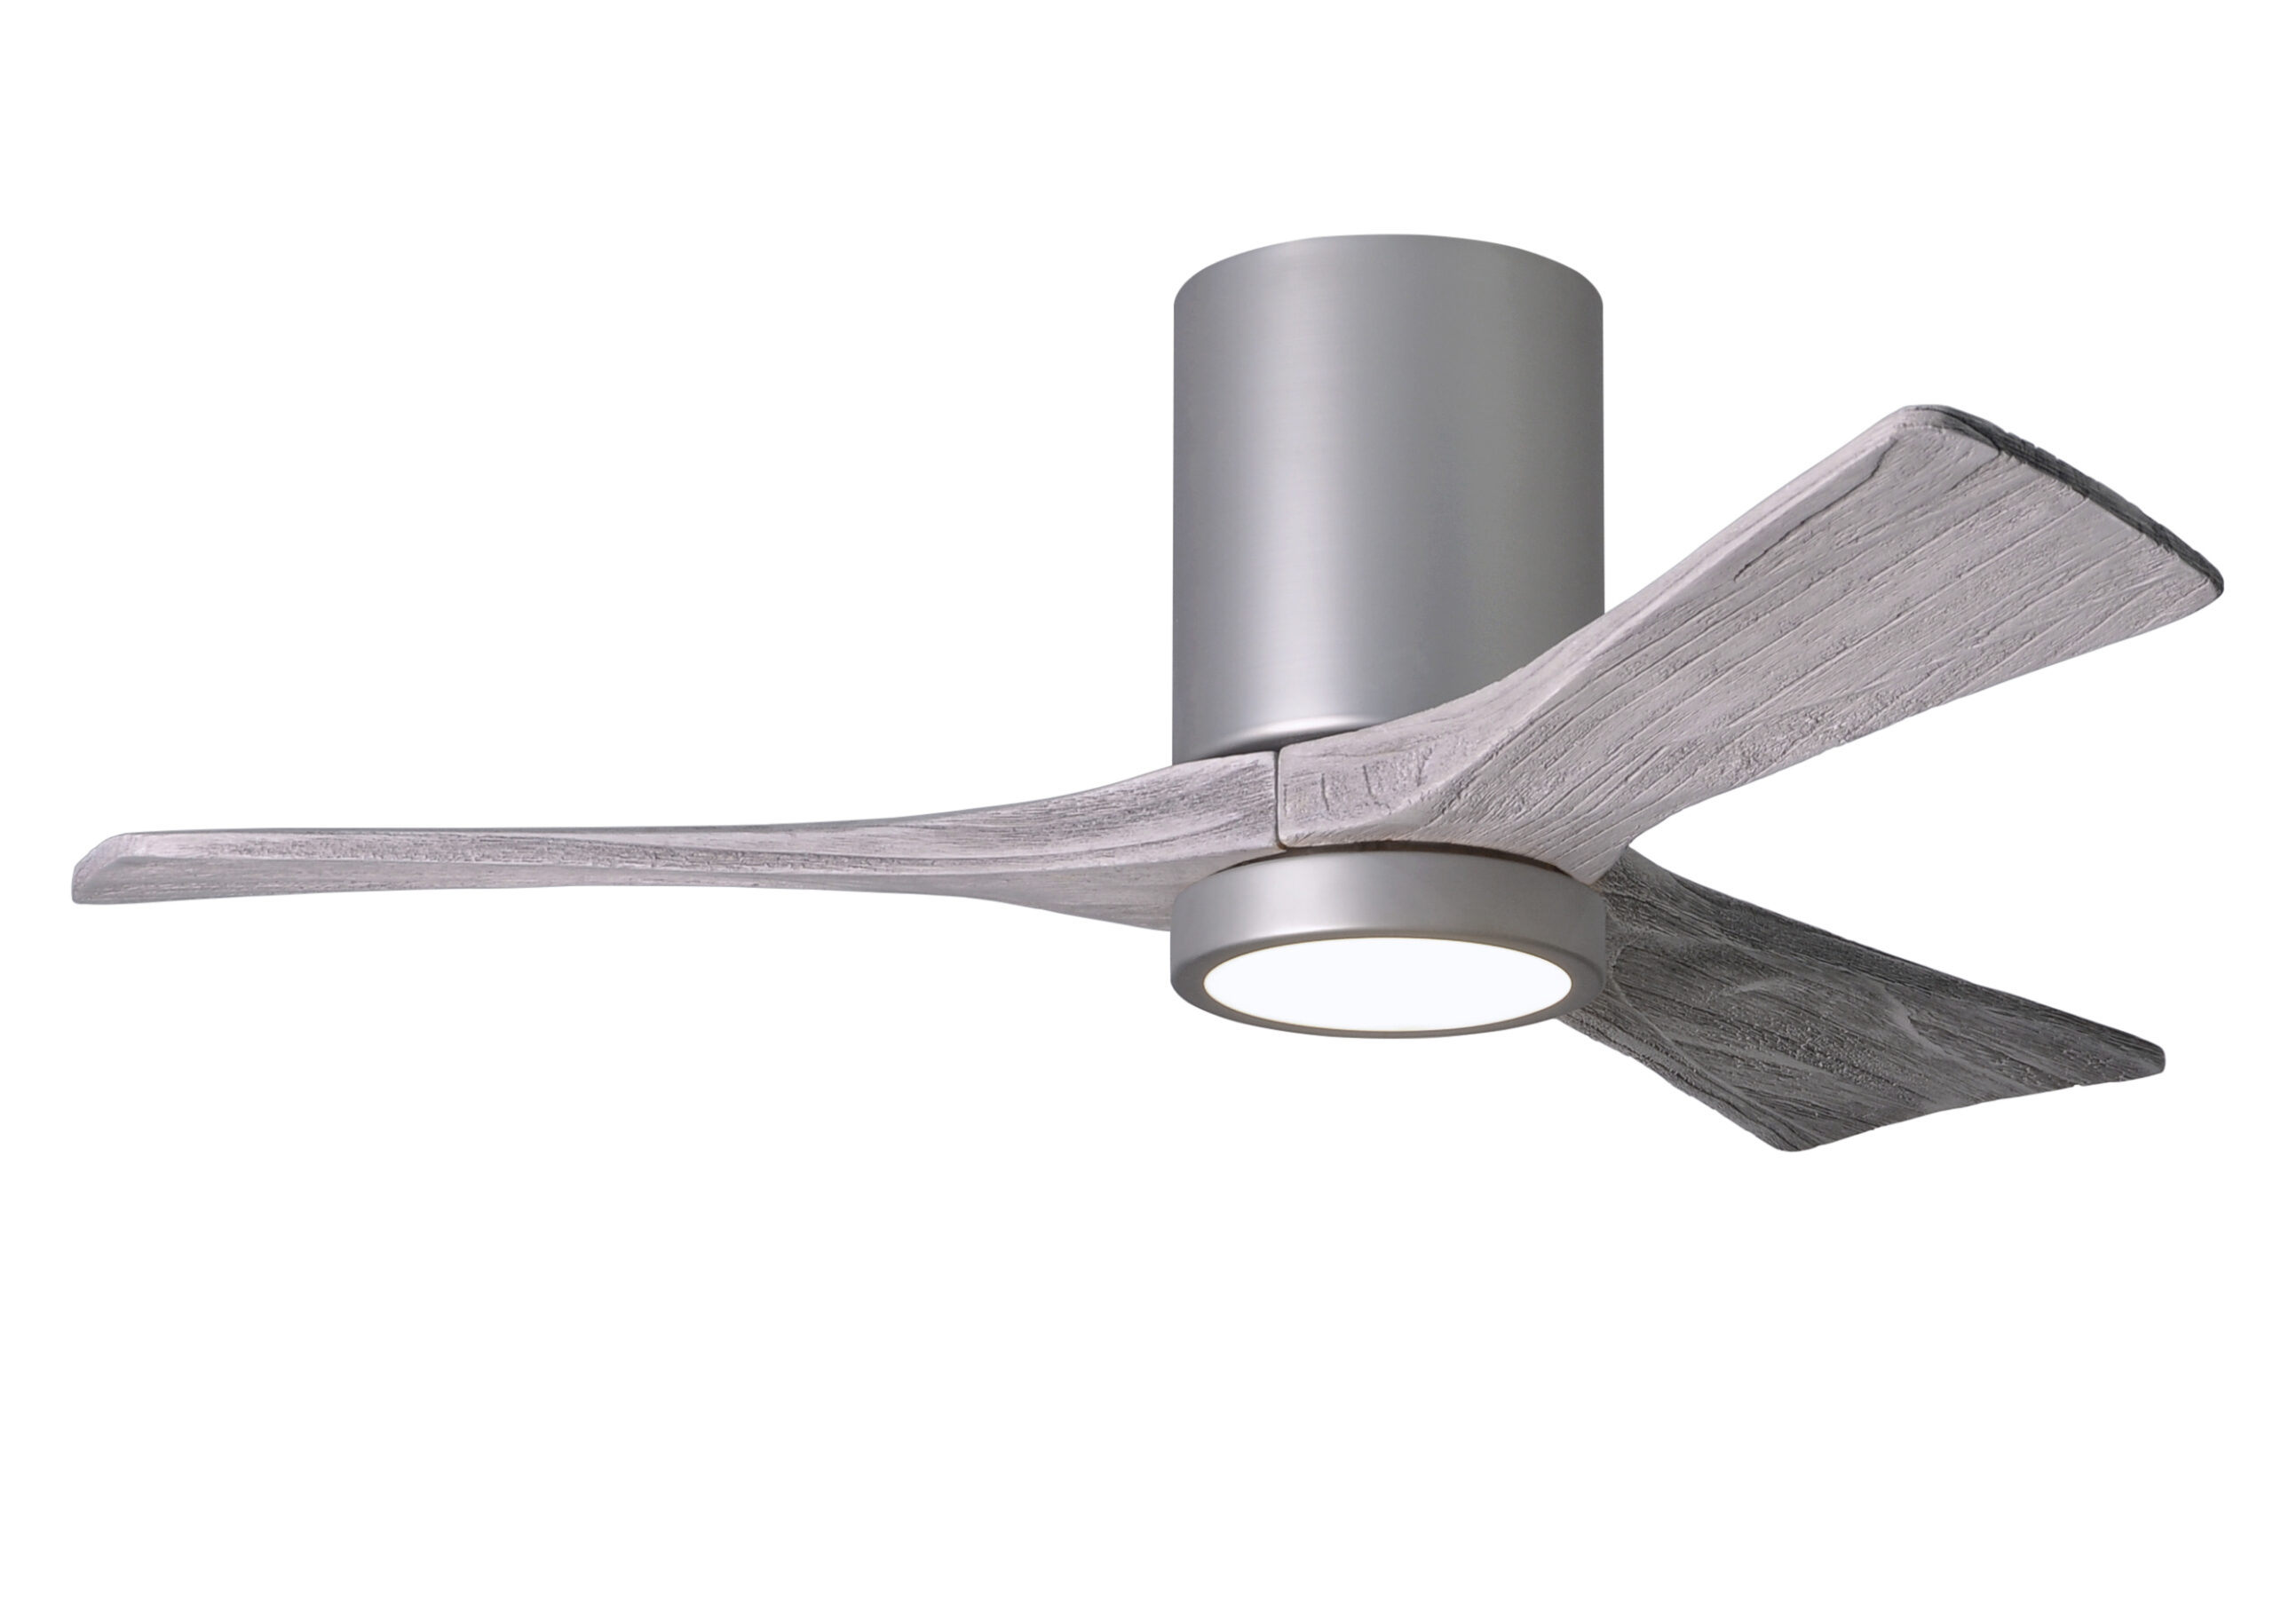 Irene-3HLK Ceiling Fan in Brushed Nickel Finish with 42